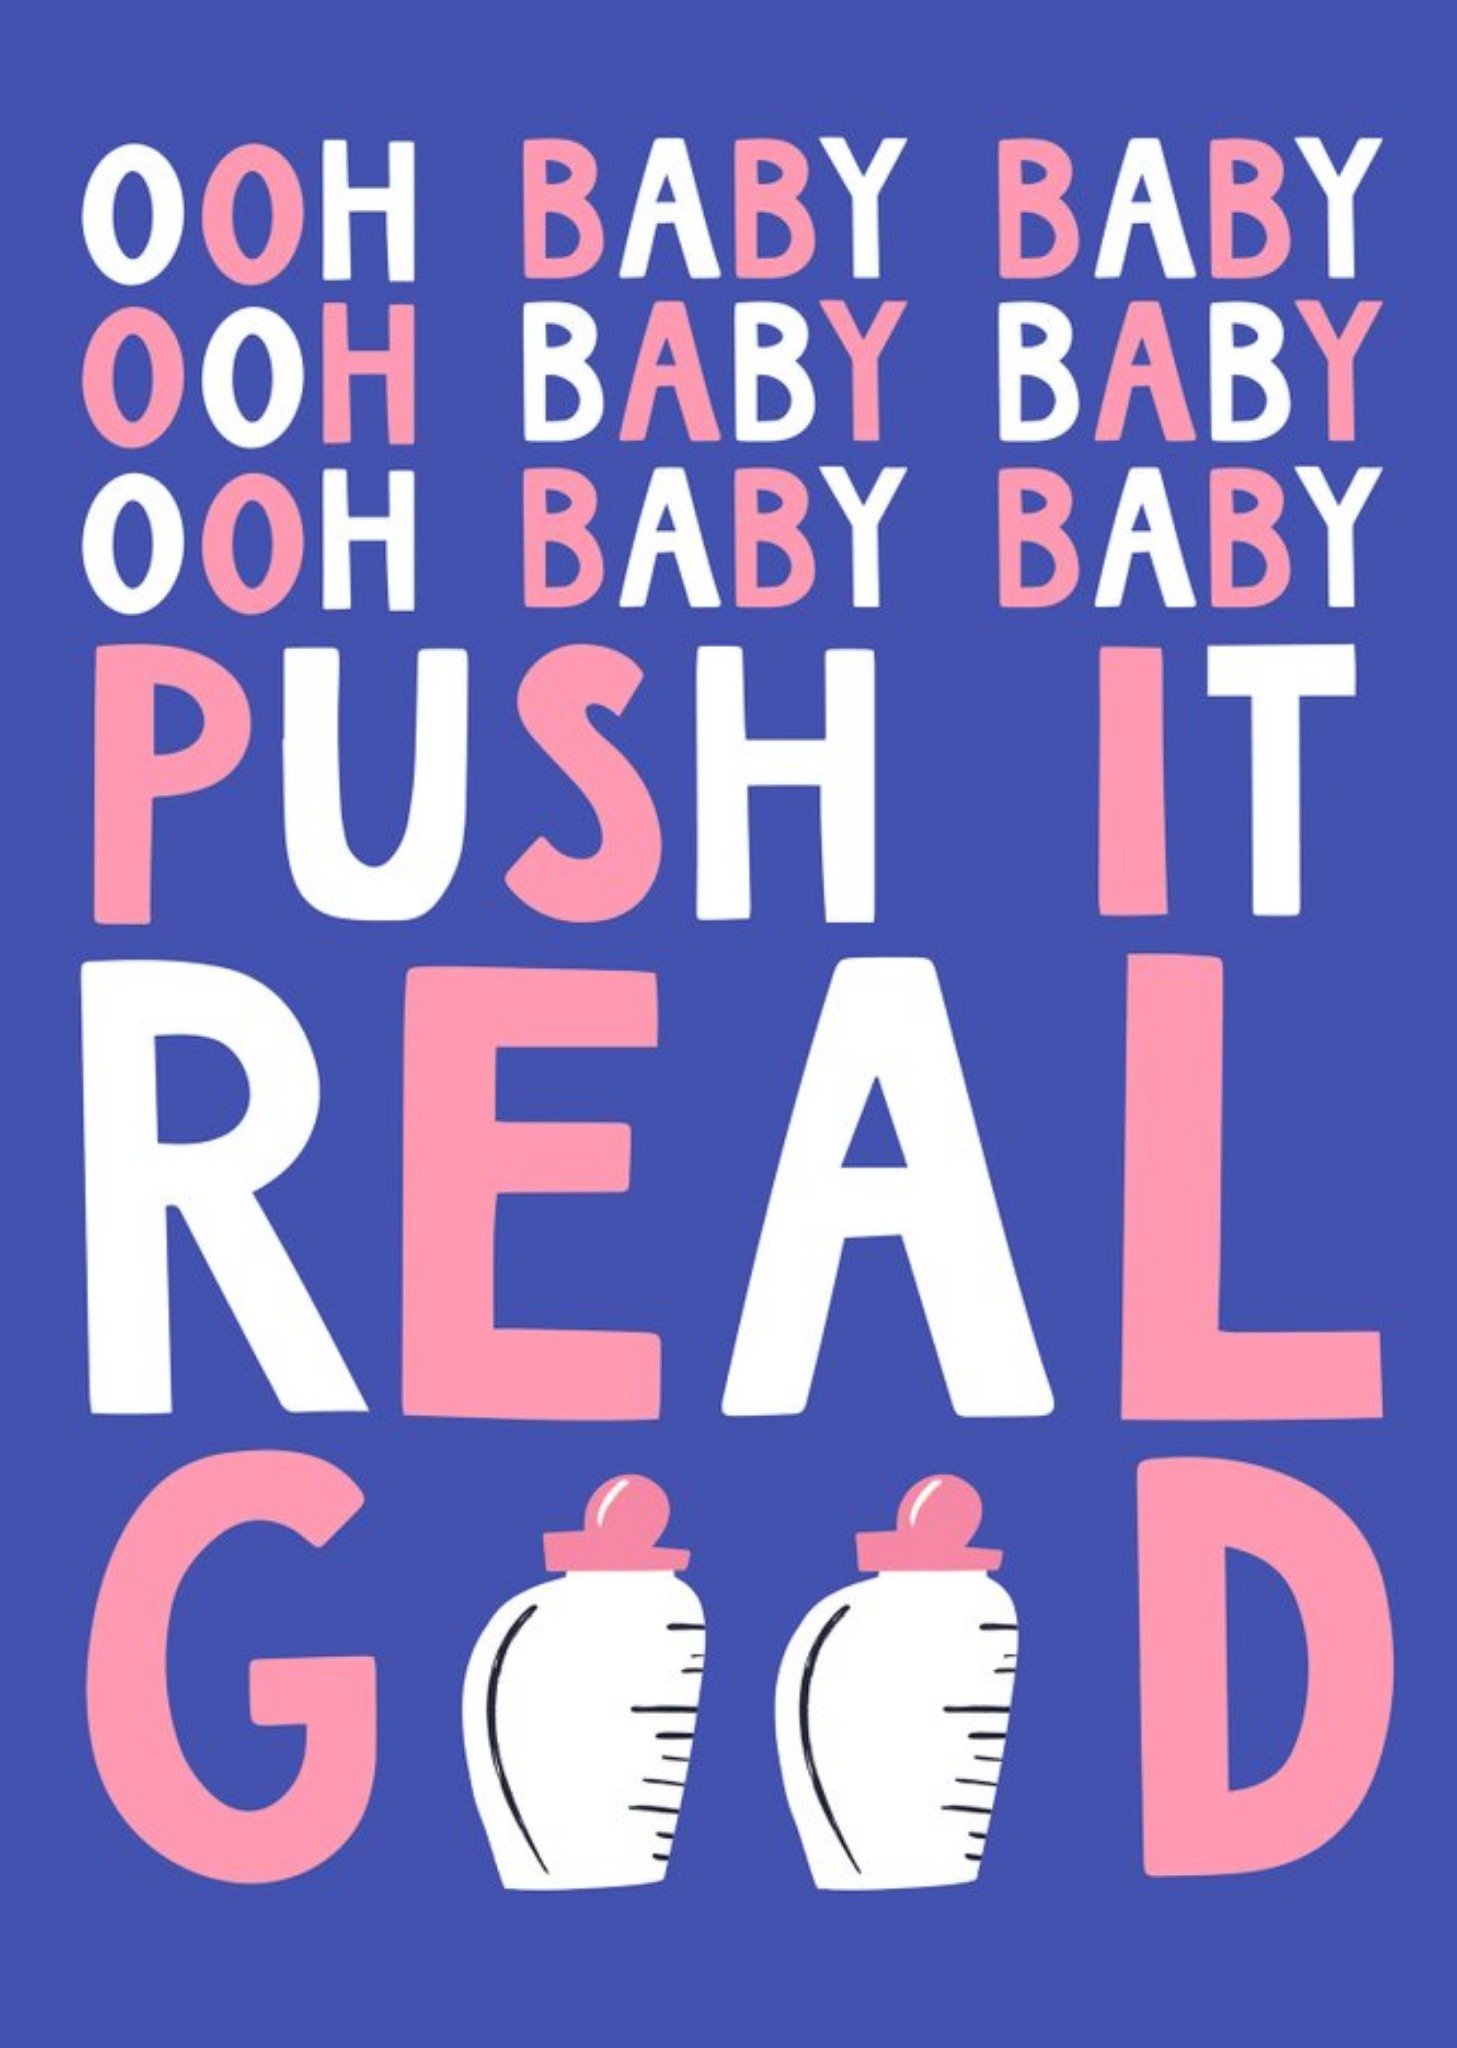 Moonpig Funny Typographic Ooh Baby Baby Card, Large